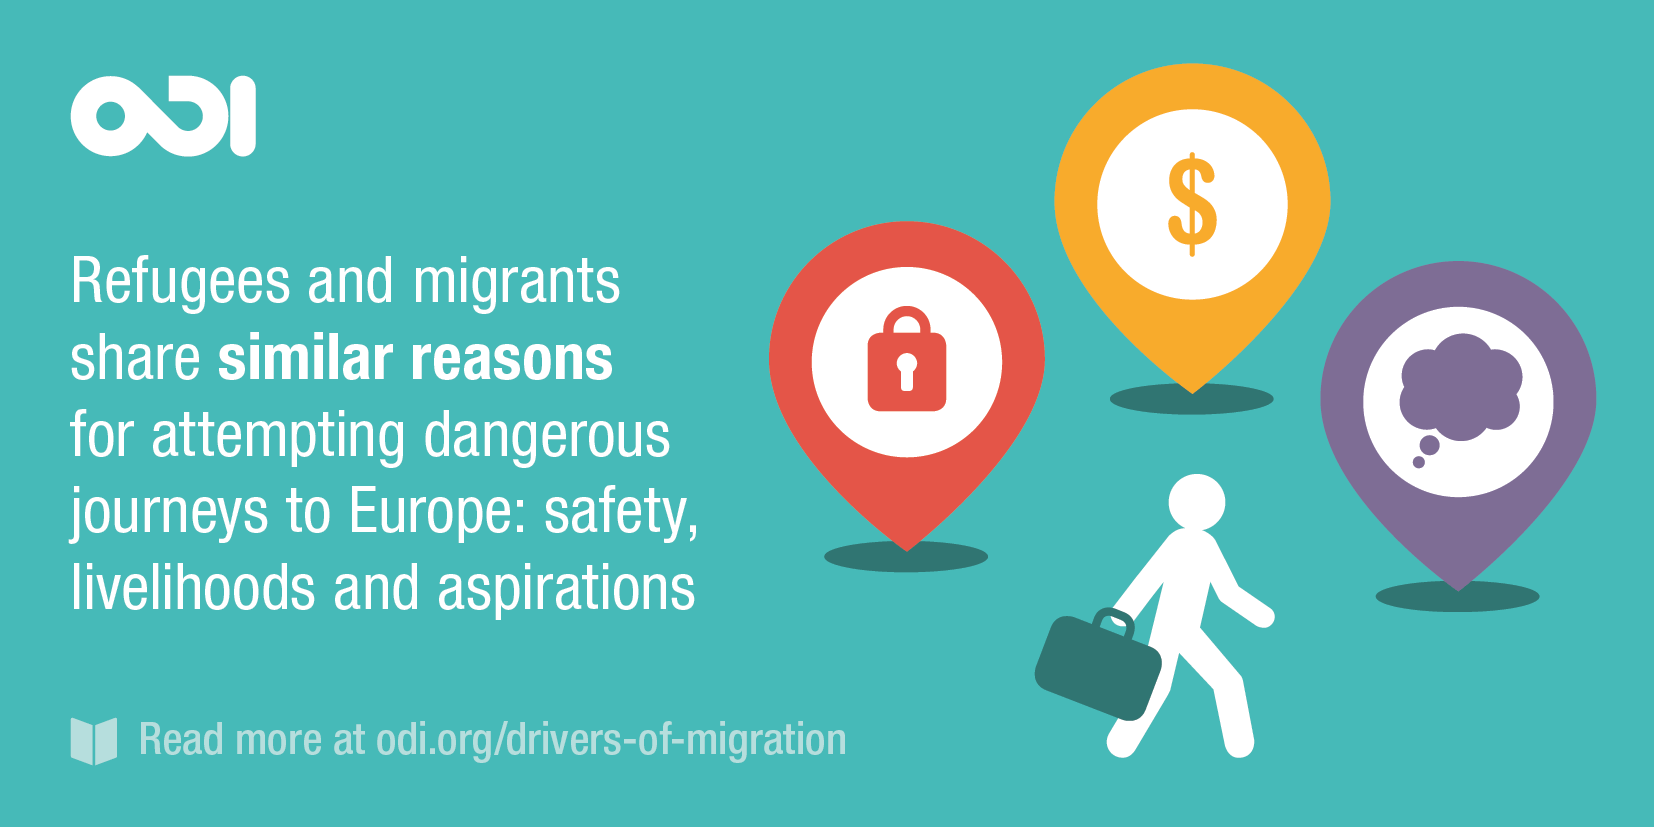 Illustration: refugees and migrations share similar reasons for attempting dangerous journeys to Europe: safety, livelihoods and aspirations